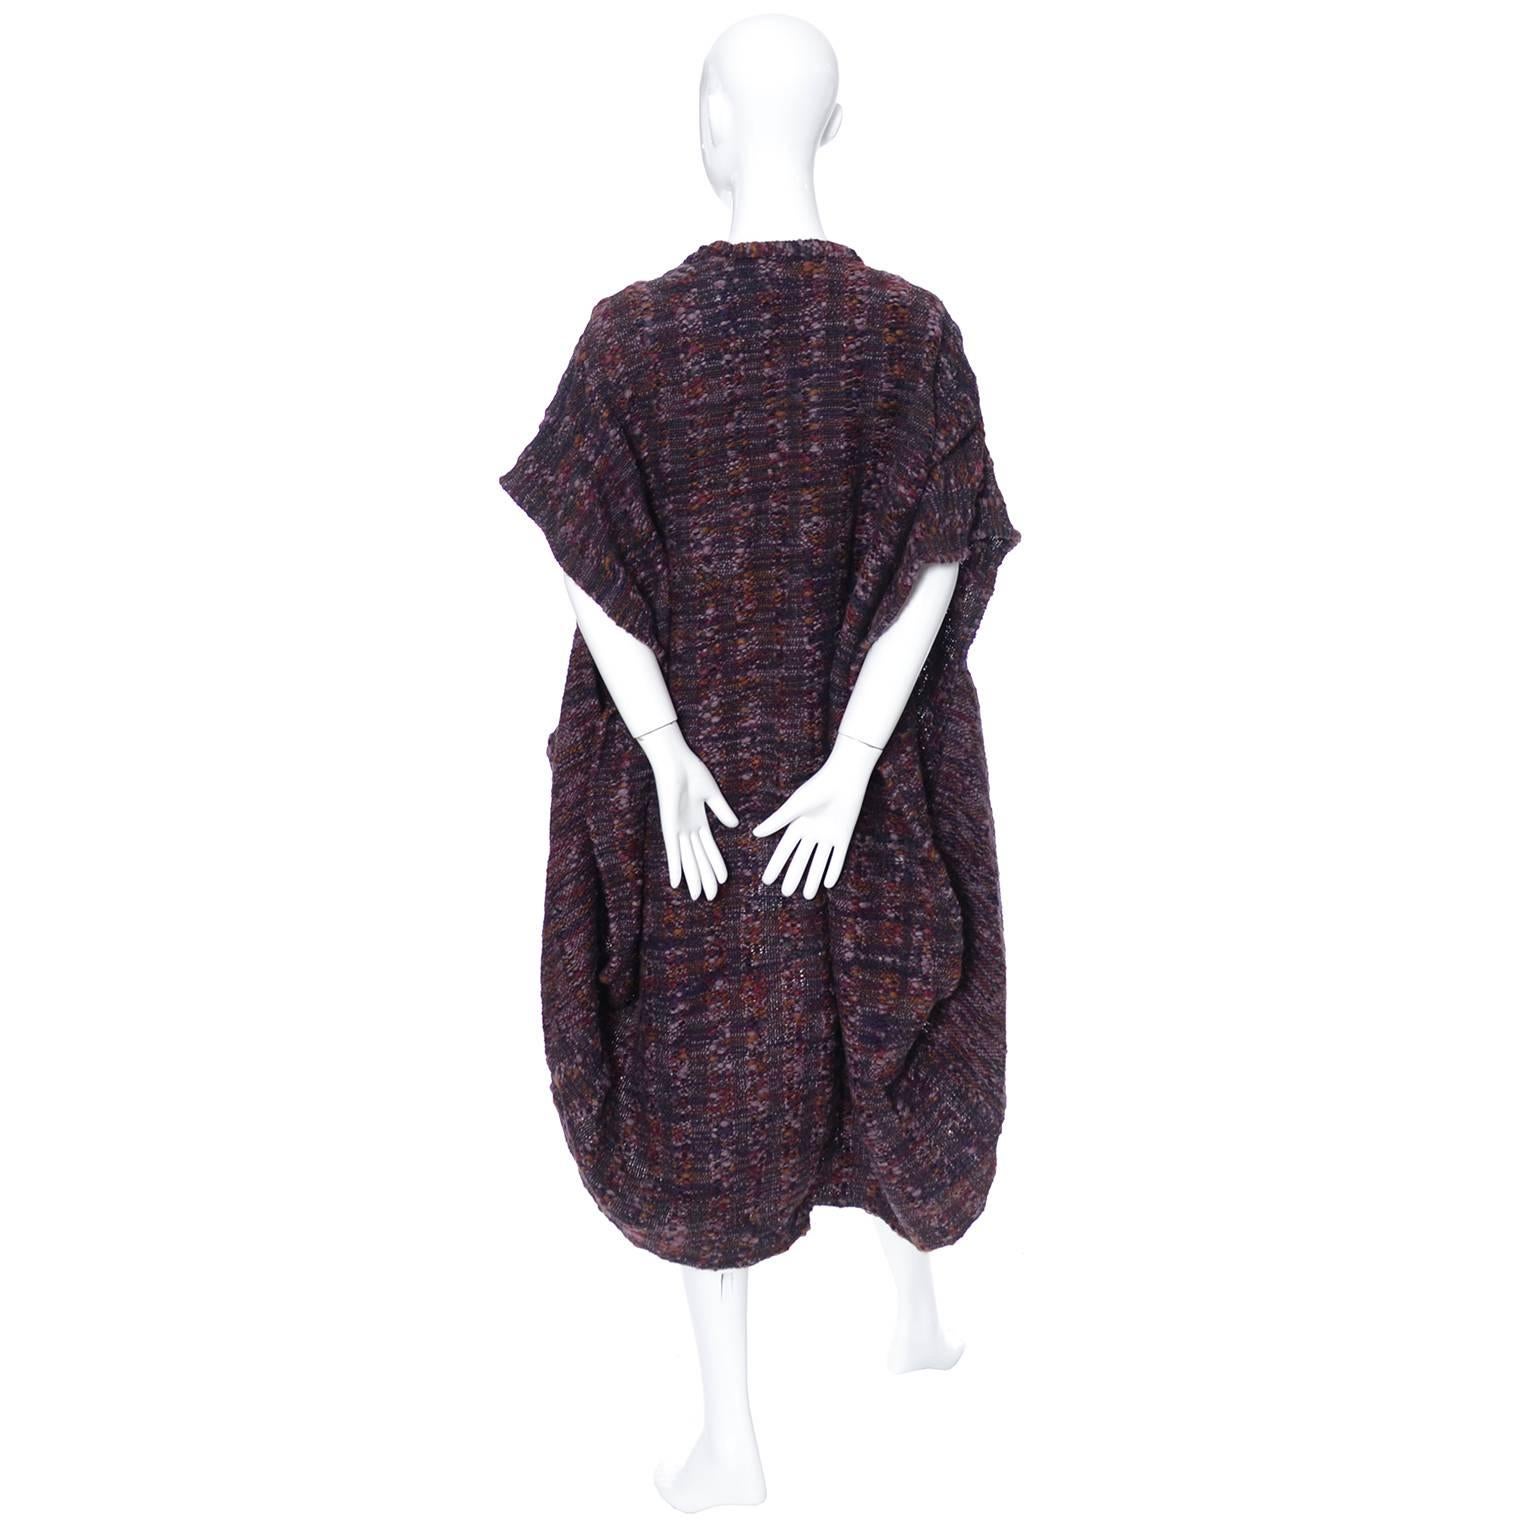 This vintage set consists of 2 beautiful hand woven pieces designed by Nikos in the 1980's.  There is an over-sized vest (or sleeveless sweater) and a matching shawl style scarf.  The fabric is purple and burgundy wool, woven with beautiful black